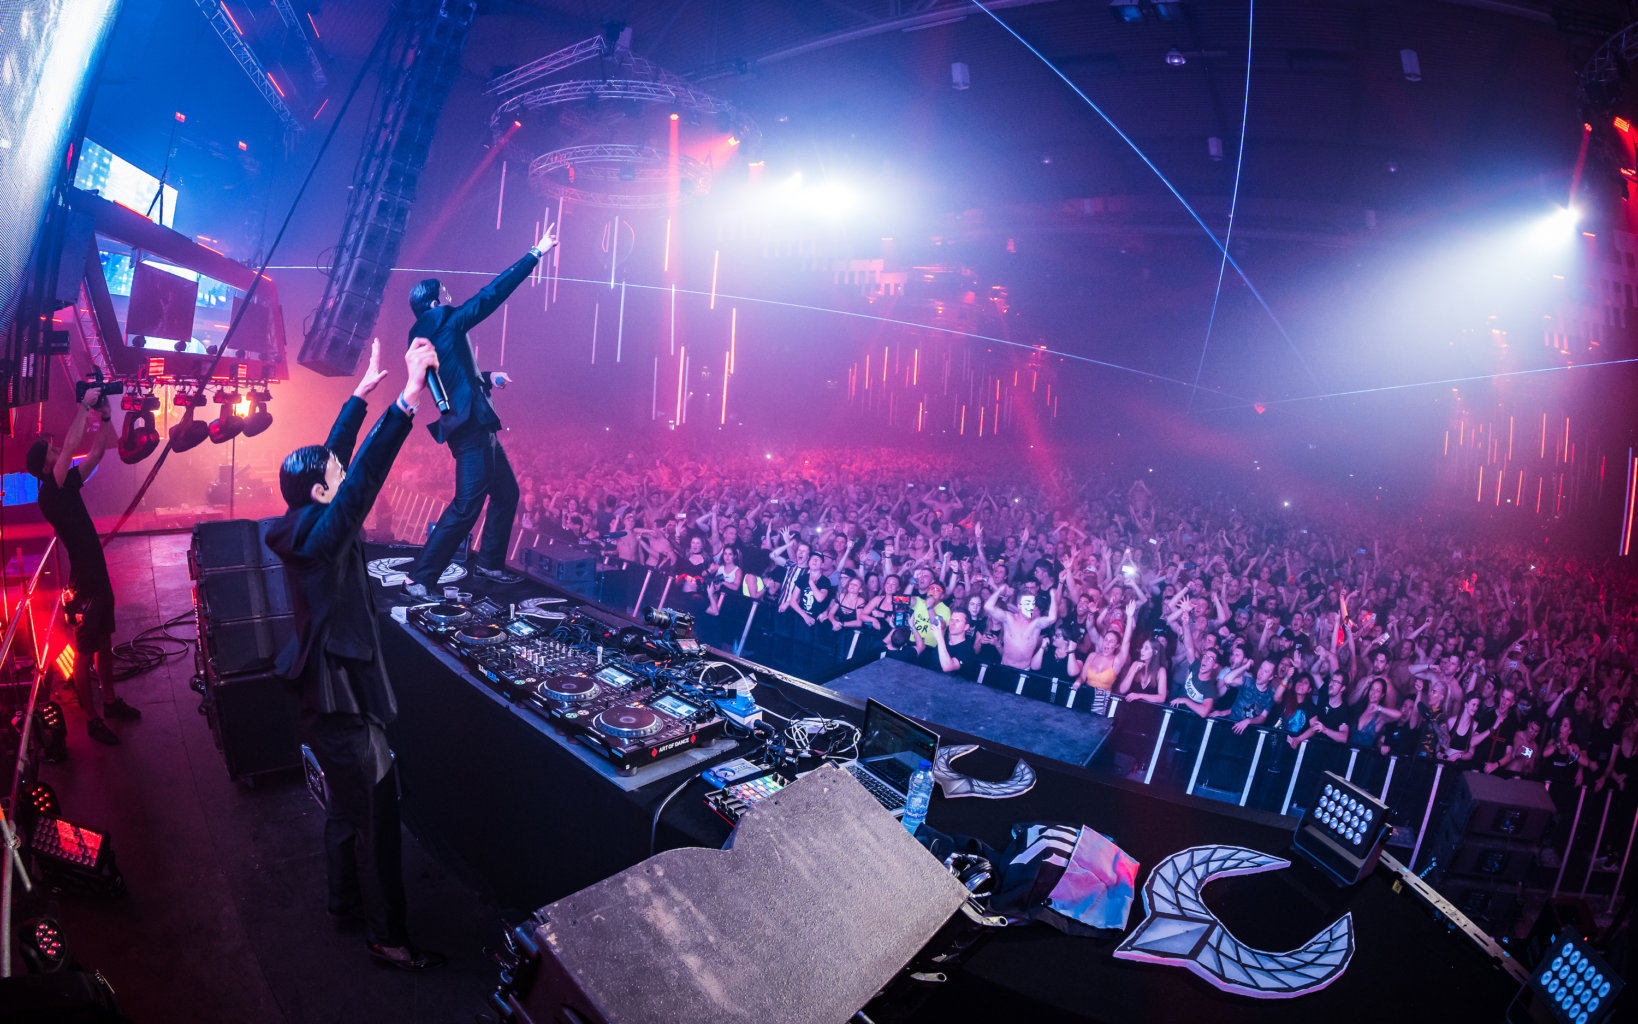 Gunz For Hire took vengeance at Supremacy 2019. Watch the liveset.